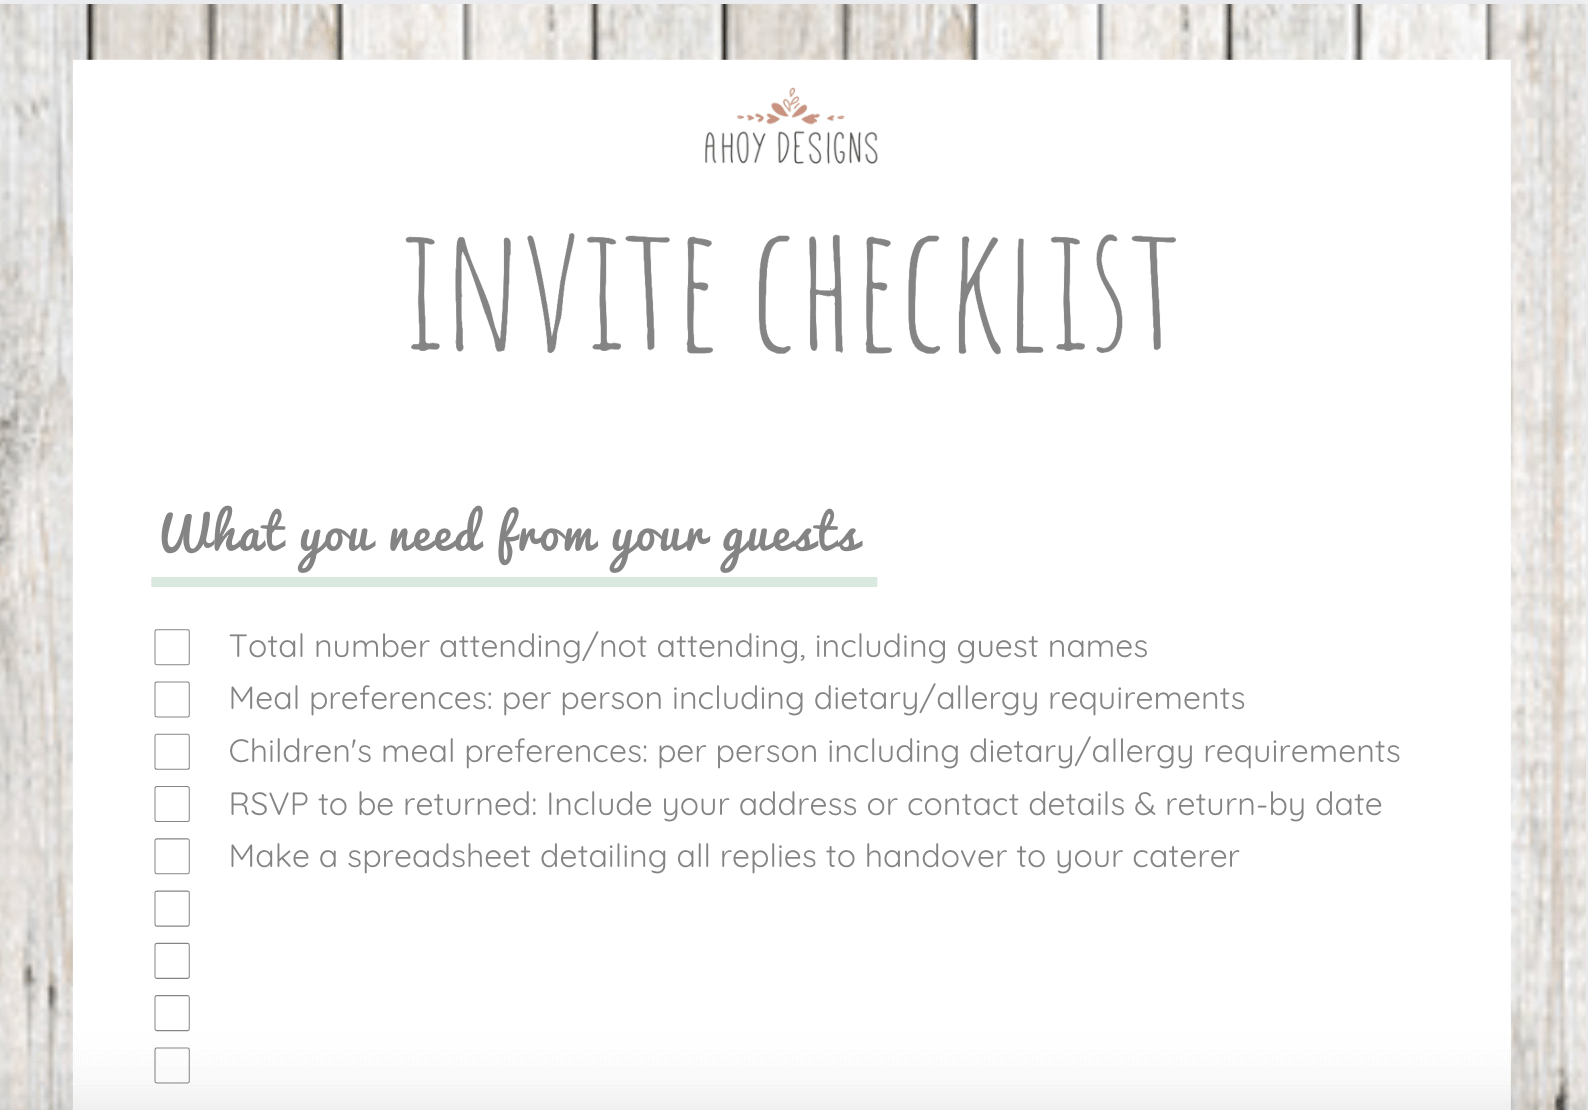 Here is what the wedding invite checklist I made looks like